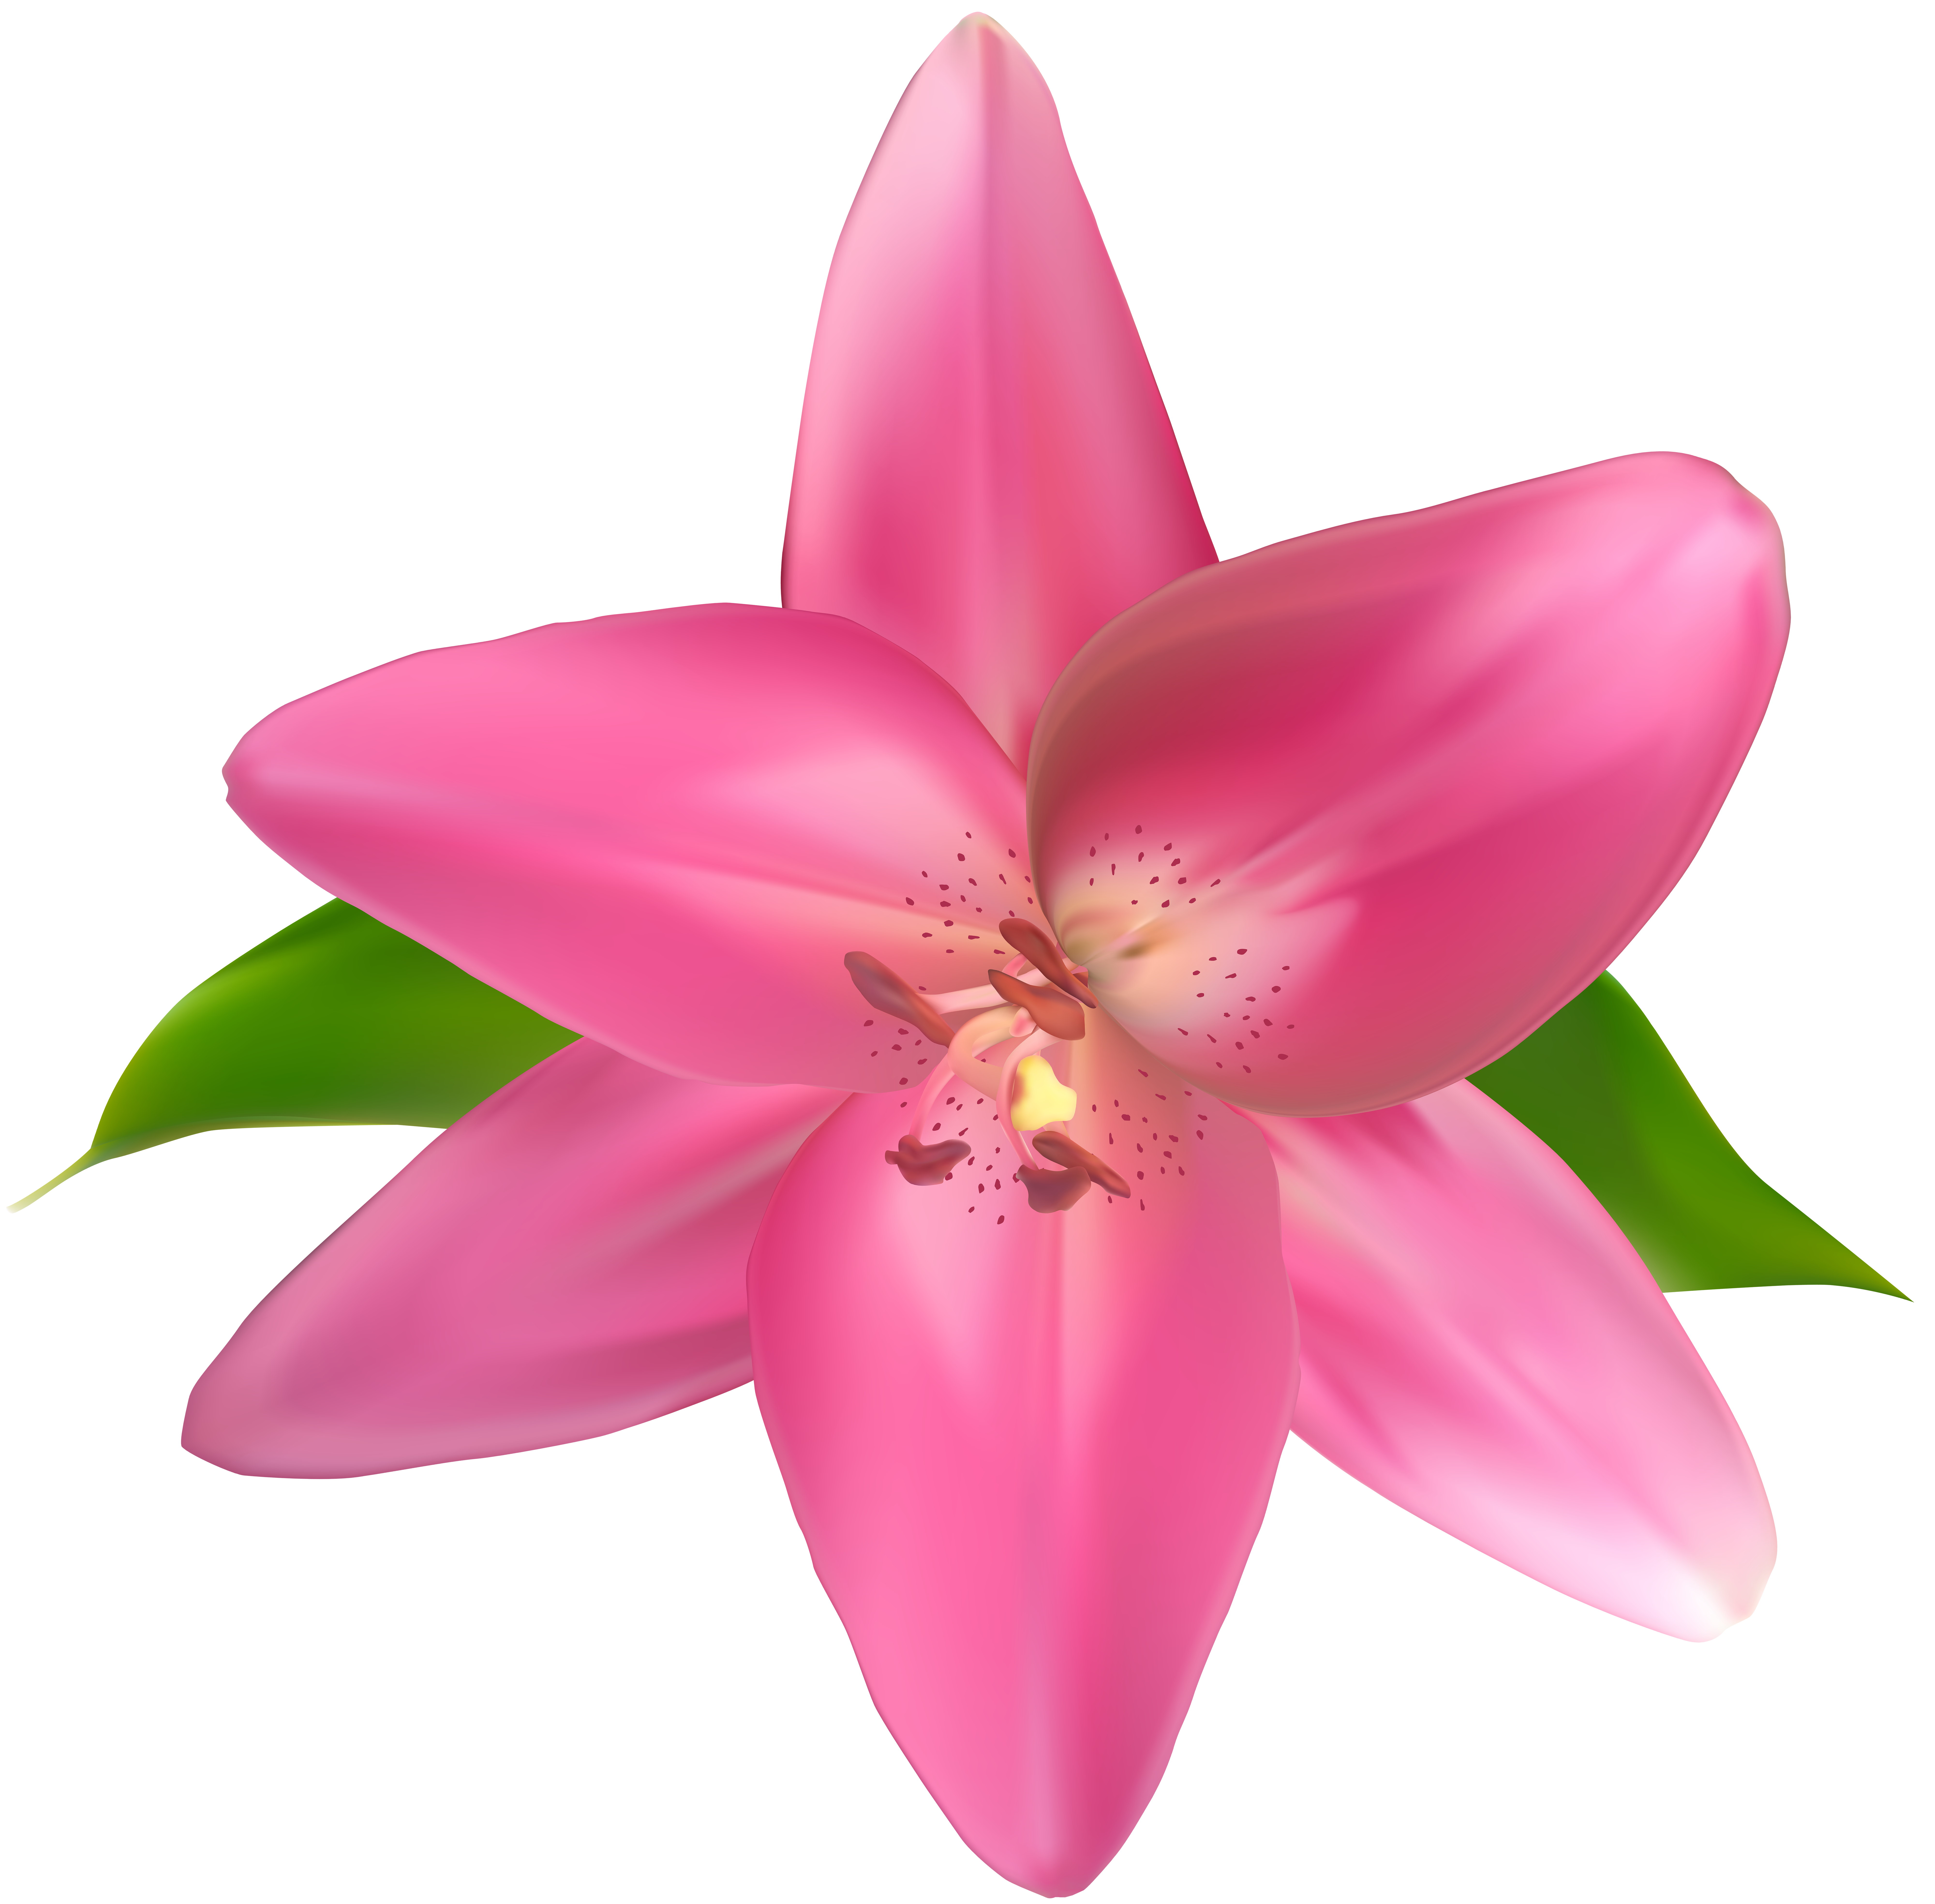 Lily clipart pomegranate.